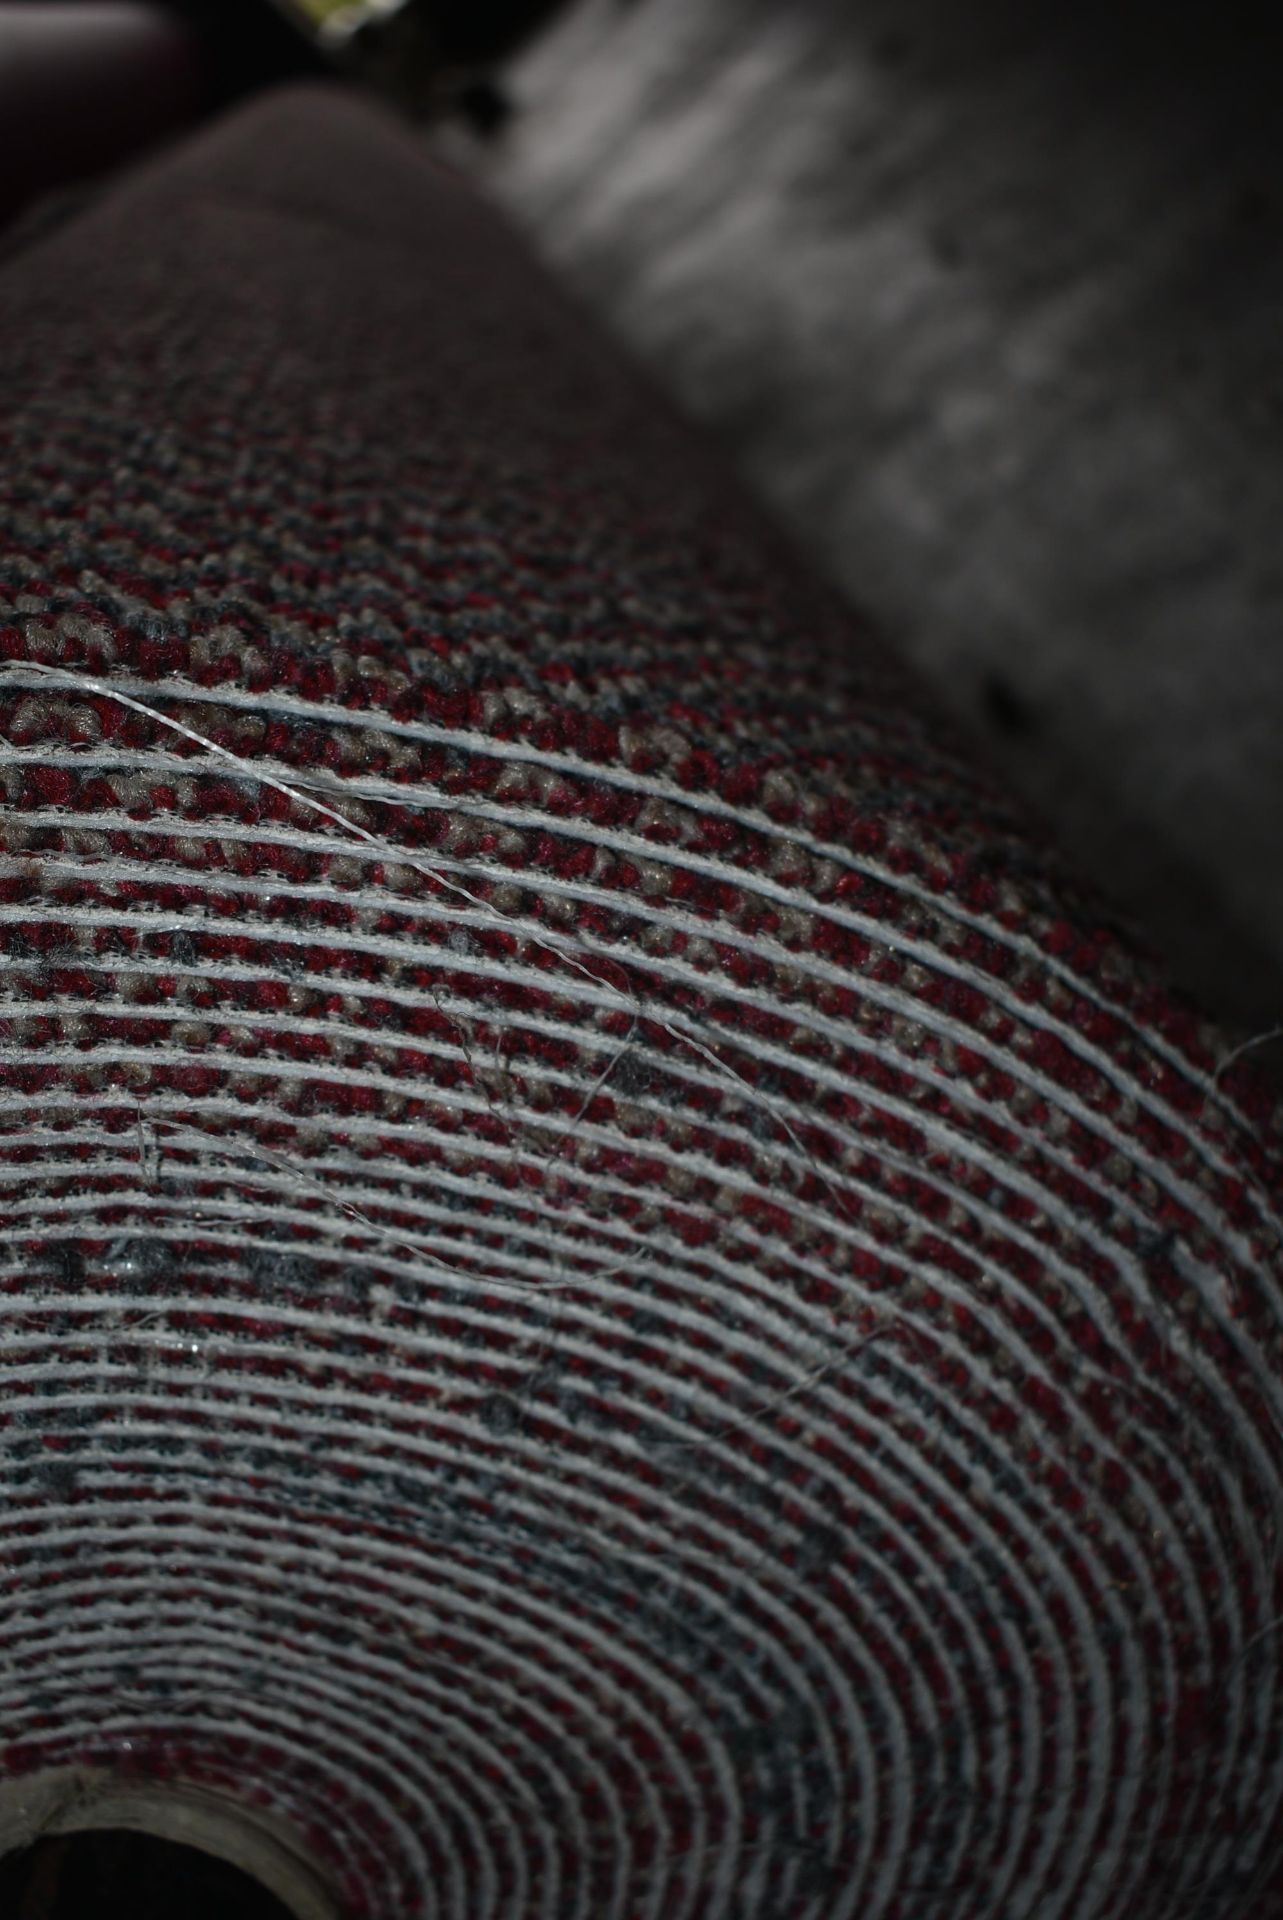 4m wide Roll of Red, Blue & Grey Speckle Carpet - Image 2 of 2